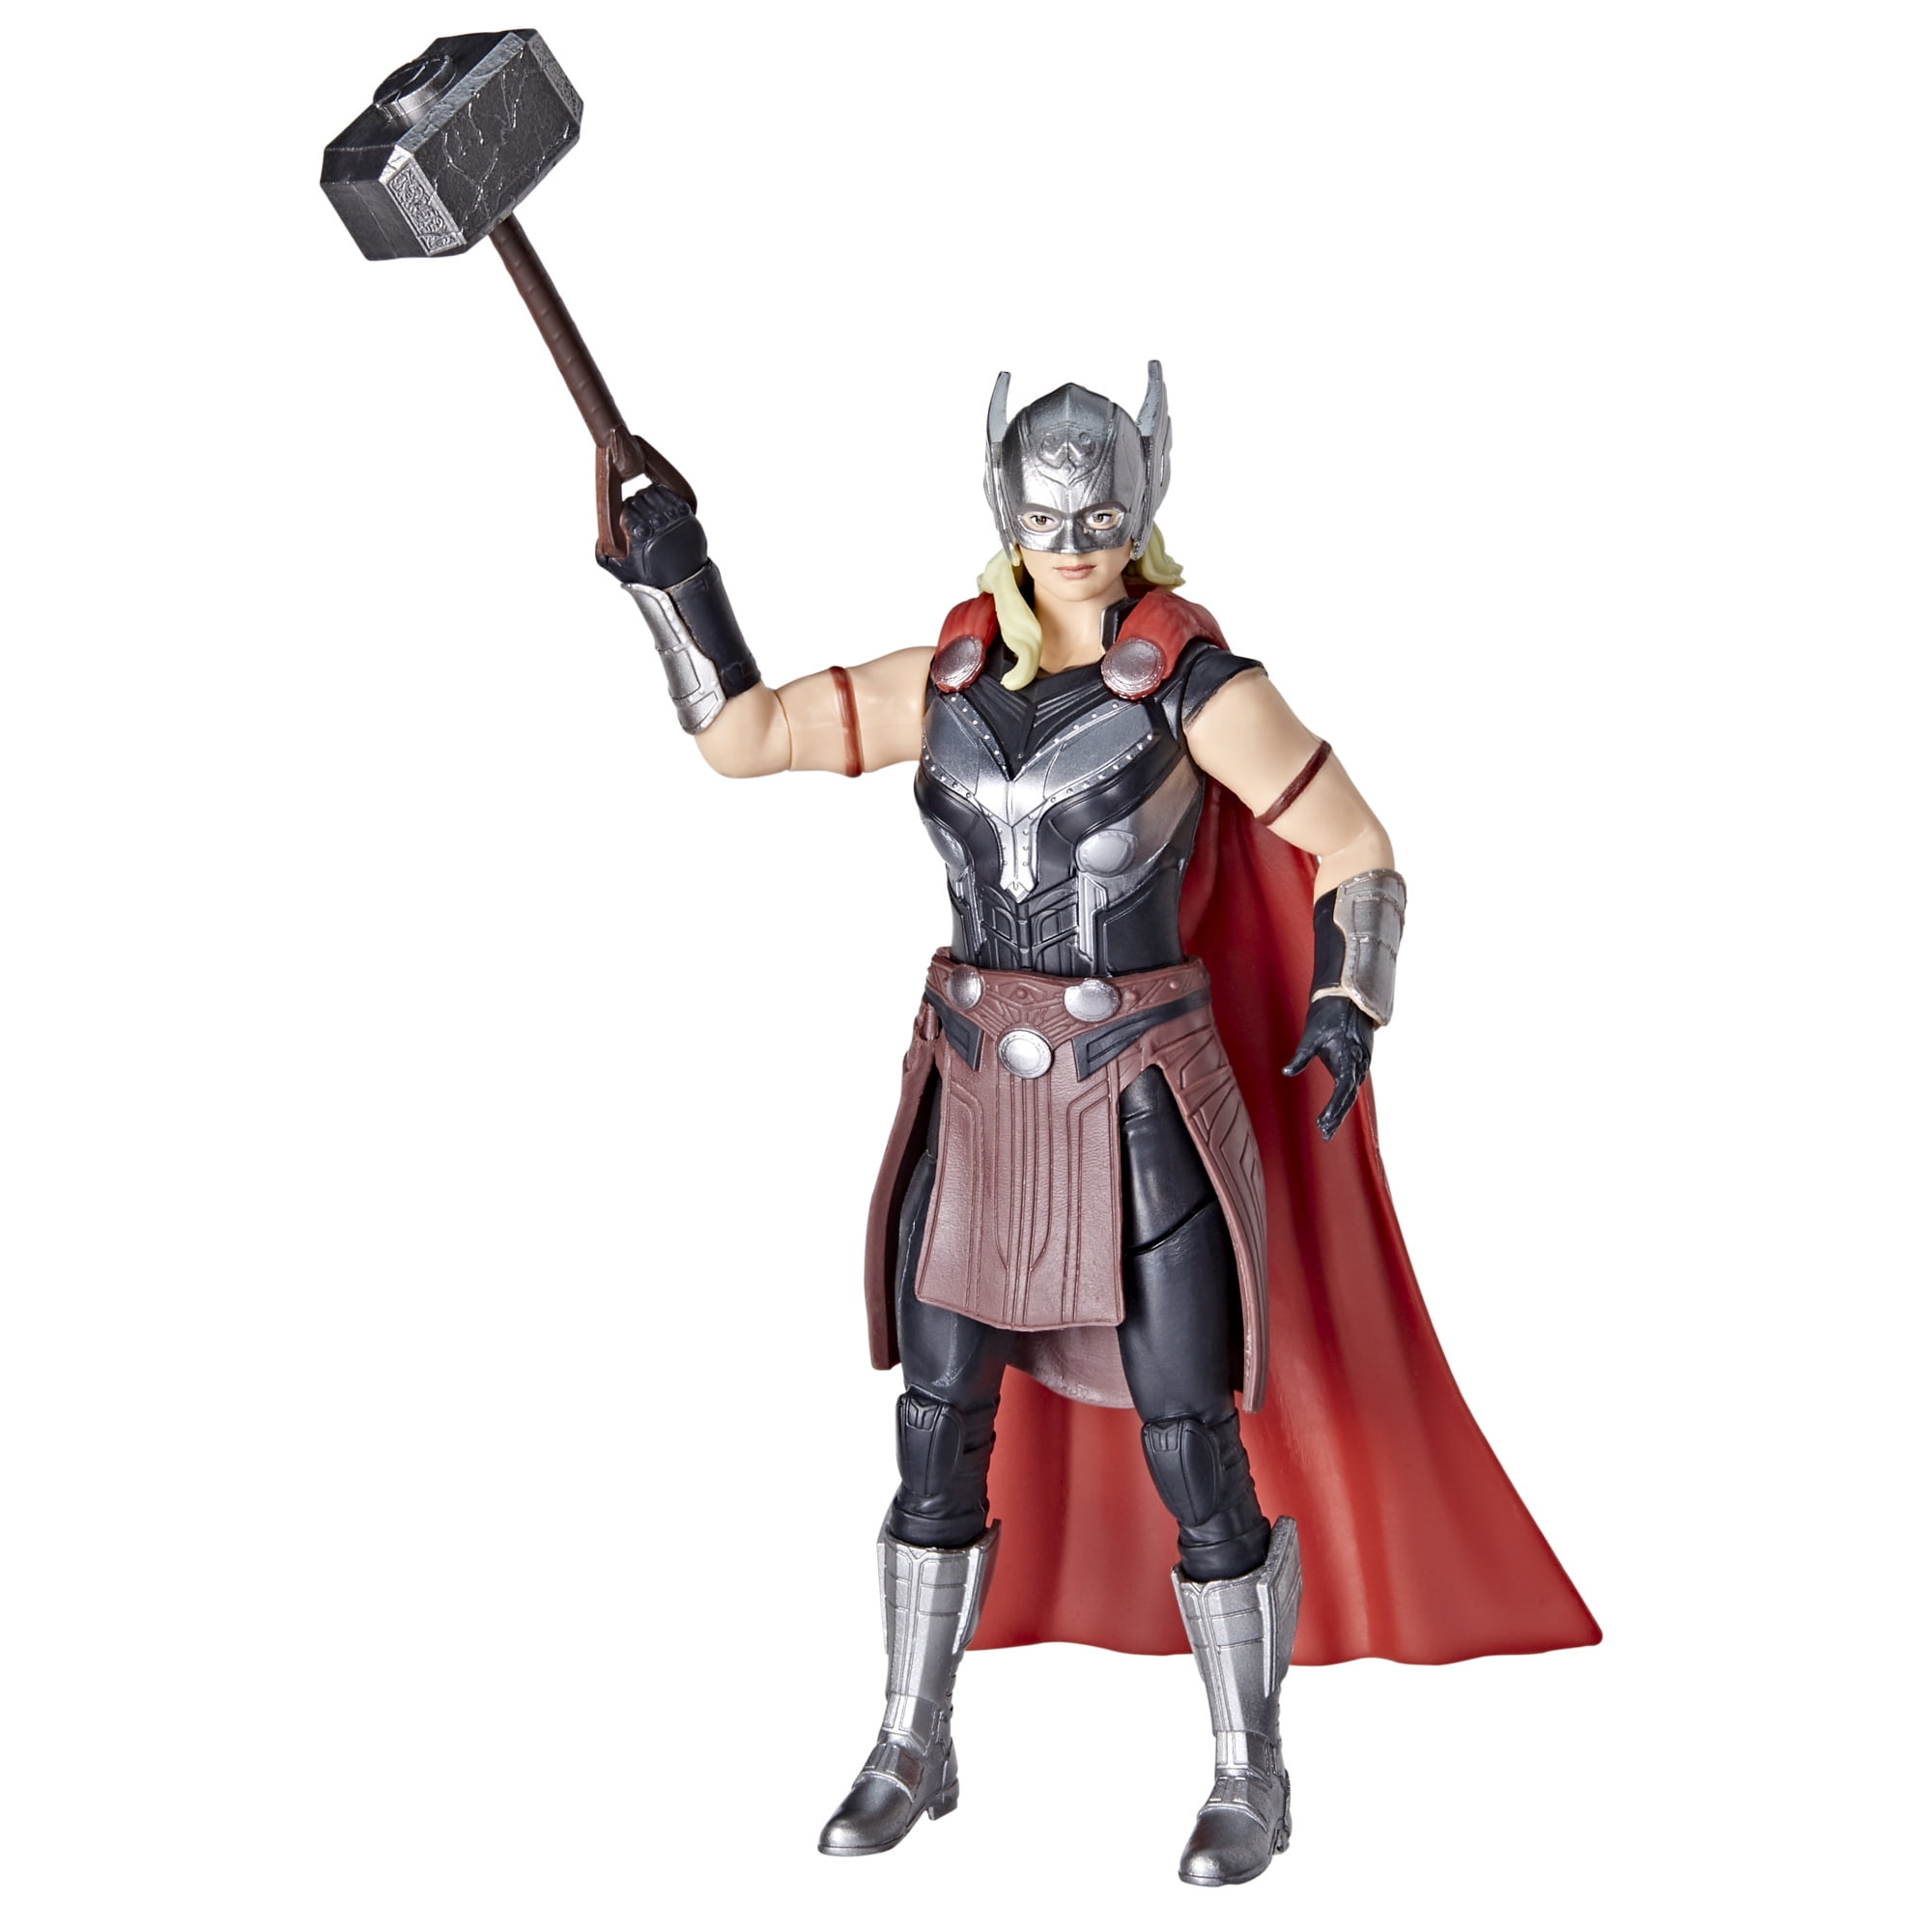 ca 16 cm Actionfigur Jane Foster Hasbro C1803 Marvel Legends The Mighty Thor 